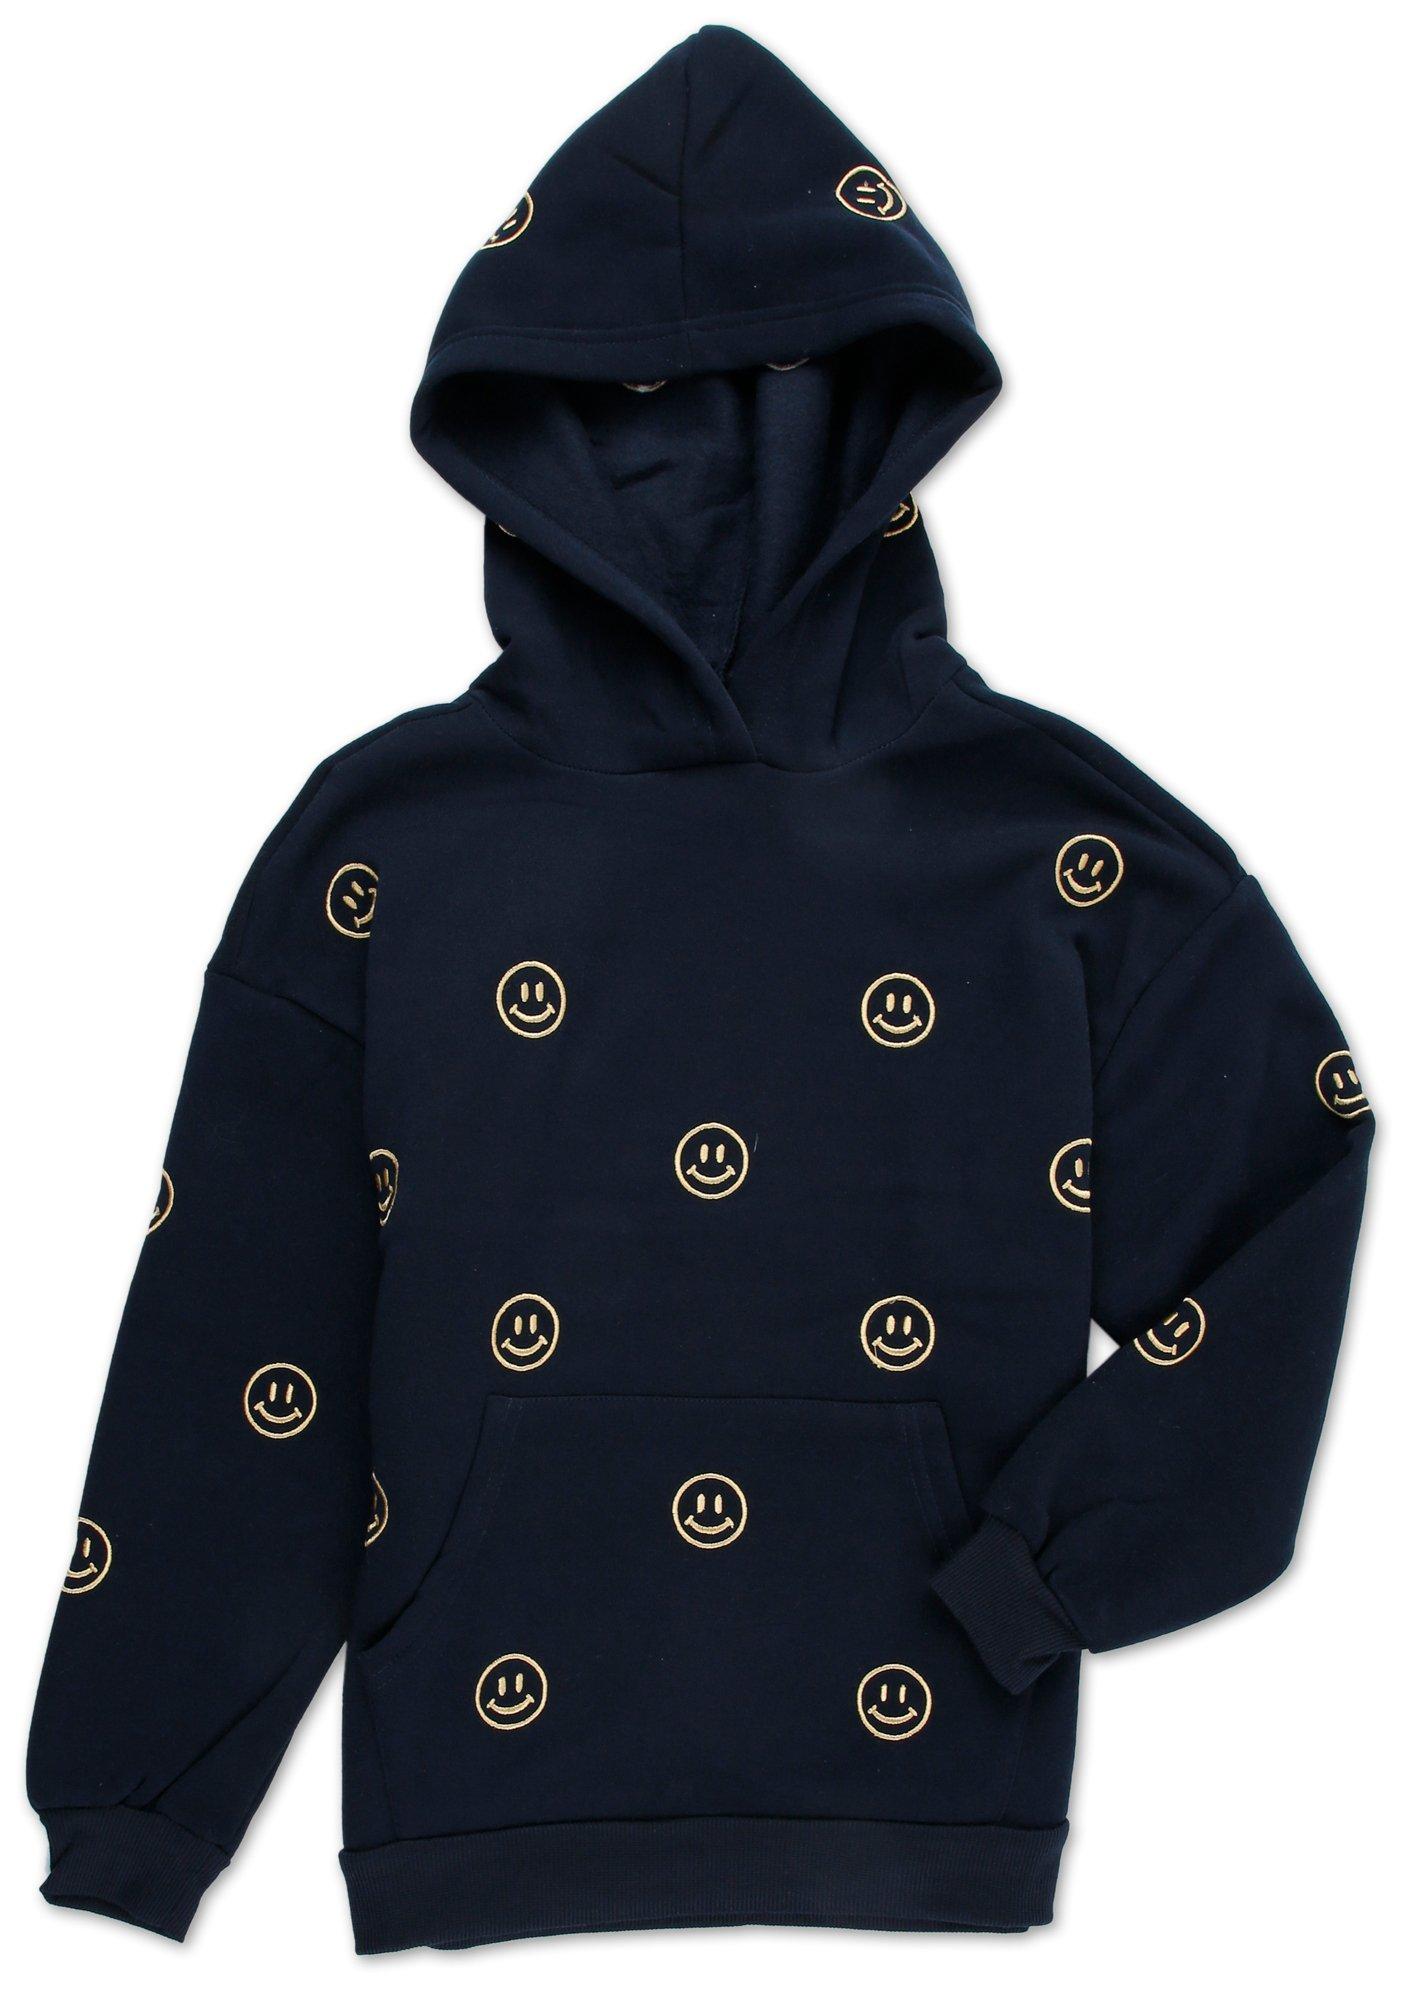 Girls Embroidered Smiley Face Hoodie